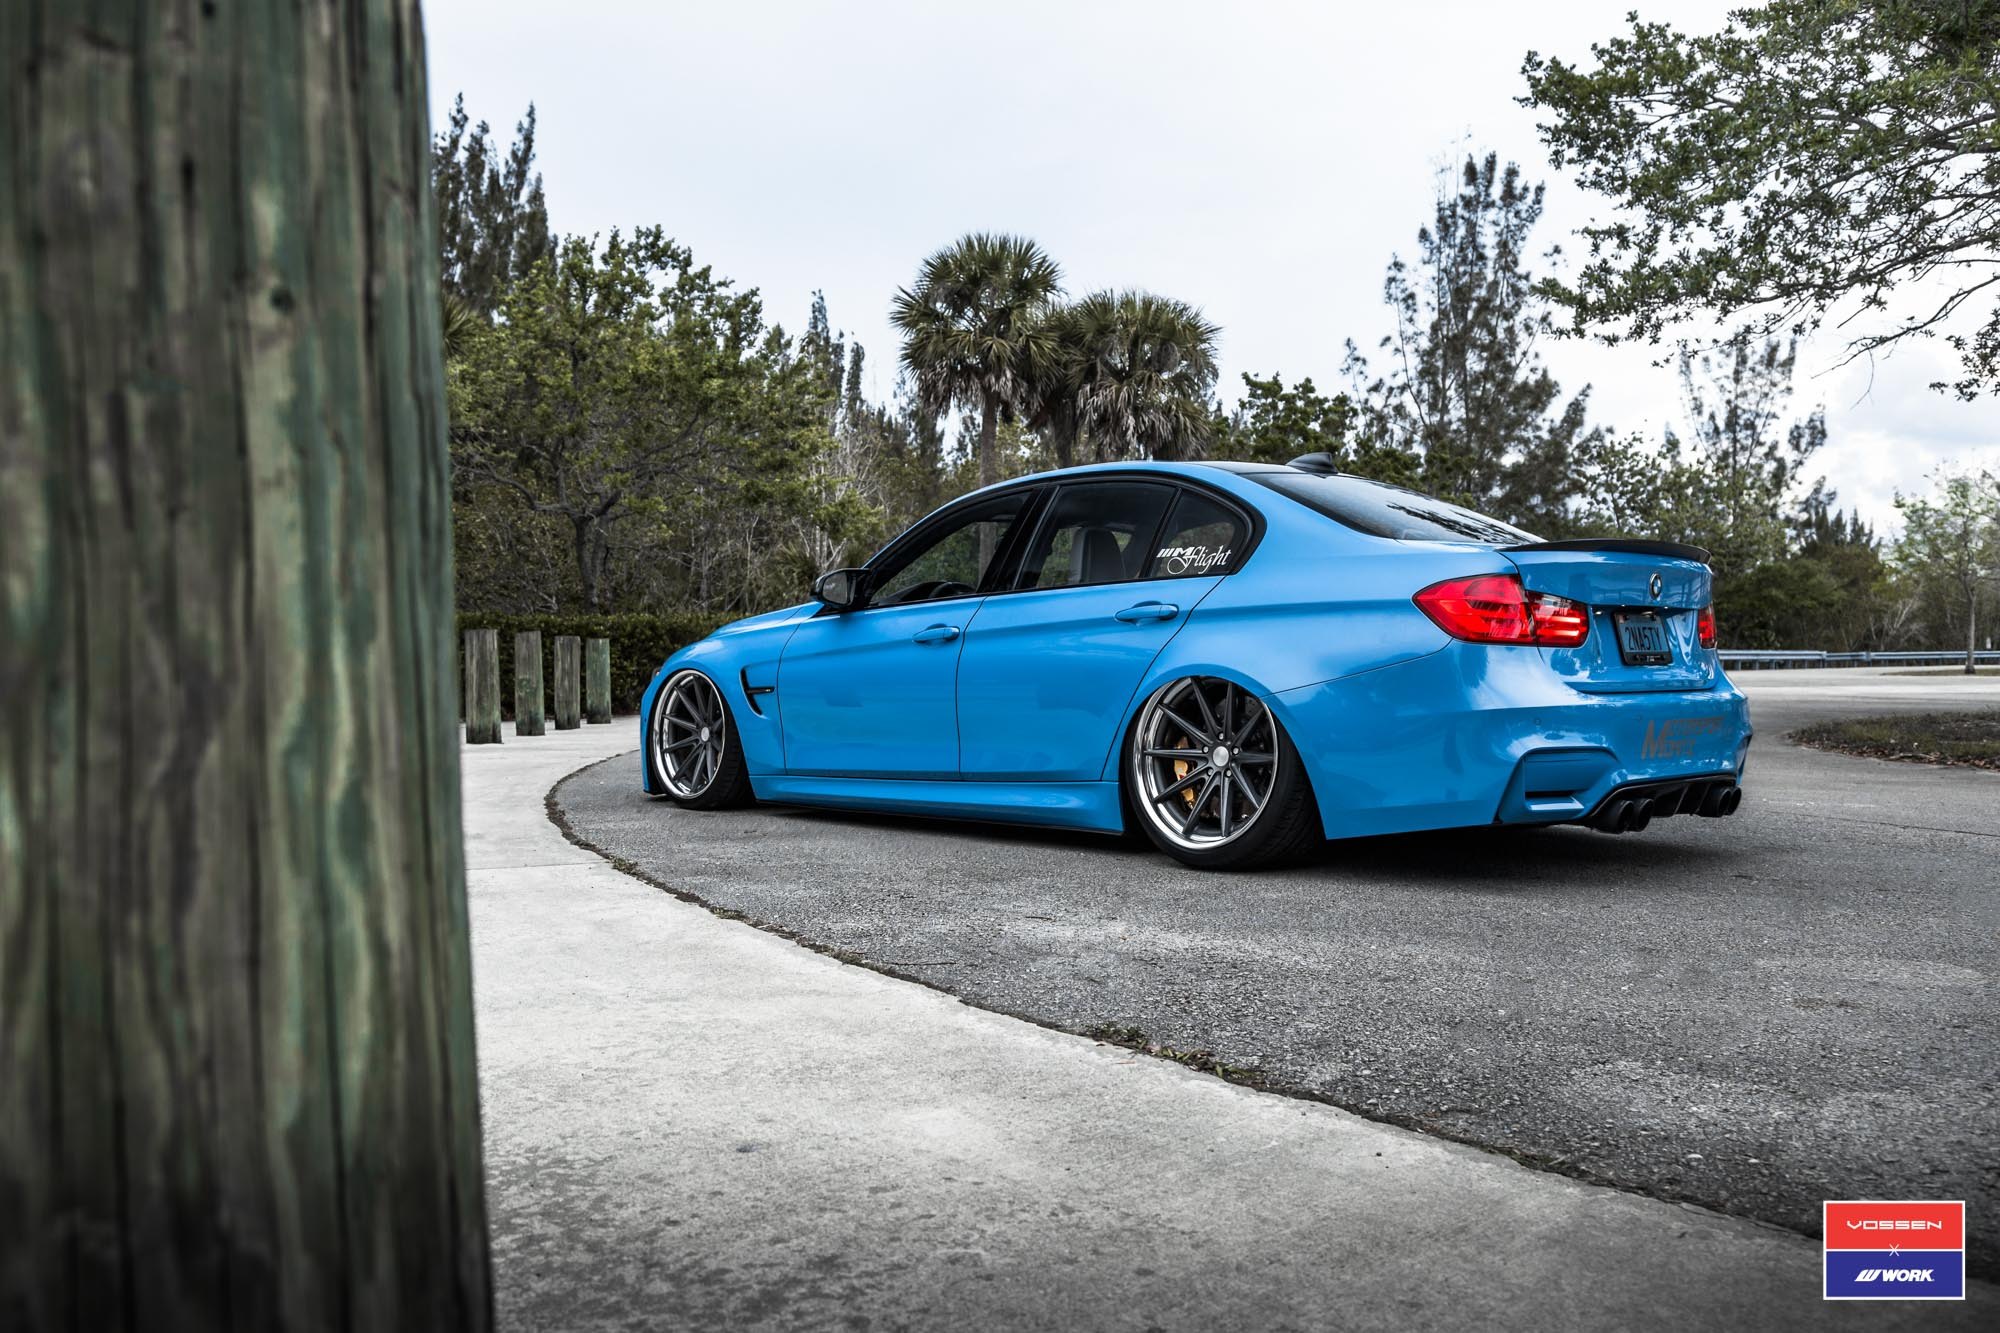 Aftermarket Side Skirts on Blue BMW 3-Series - Photo by Vossen